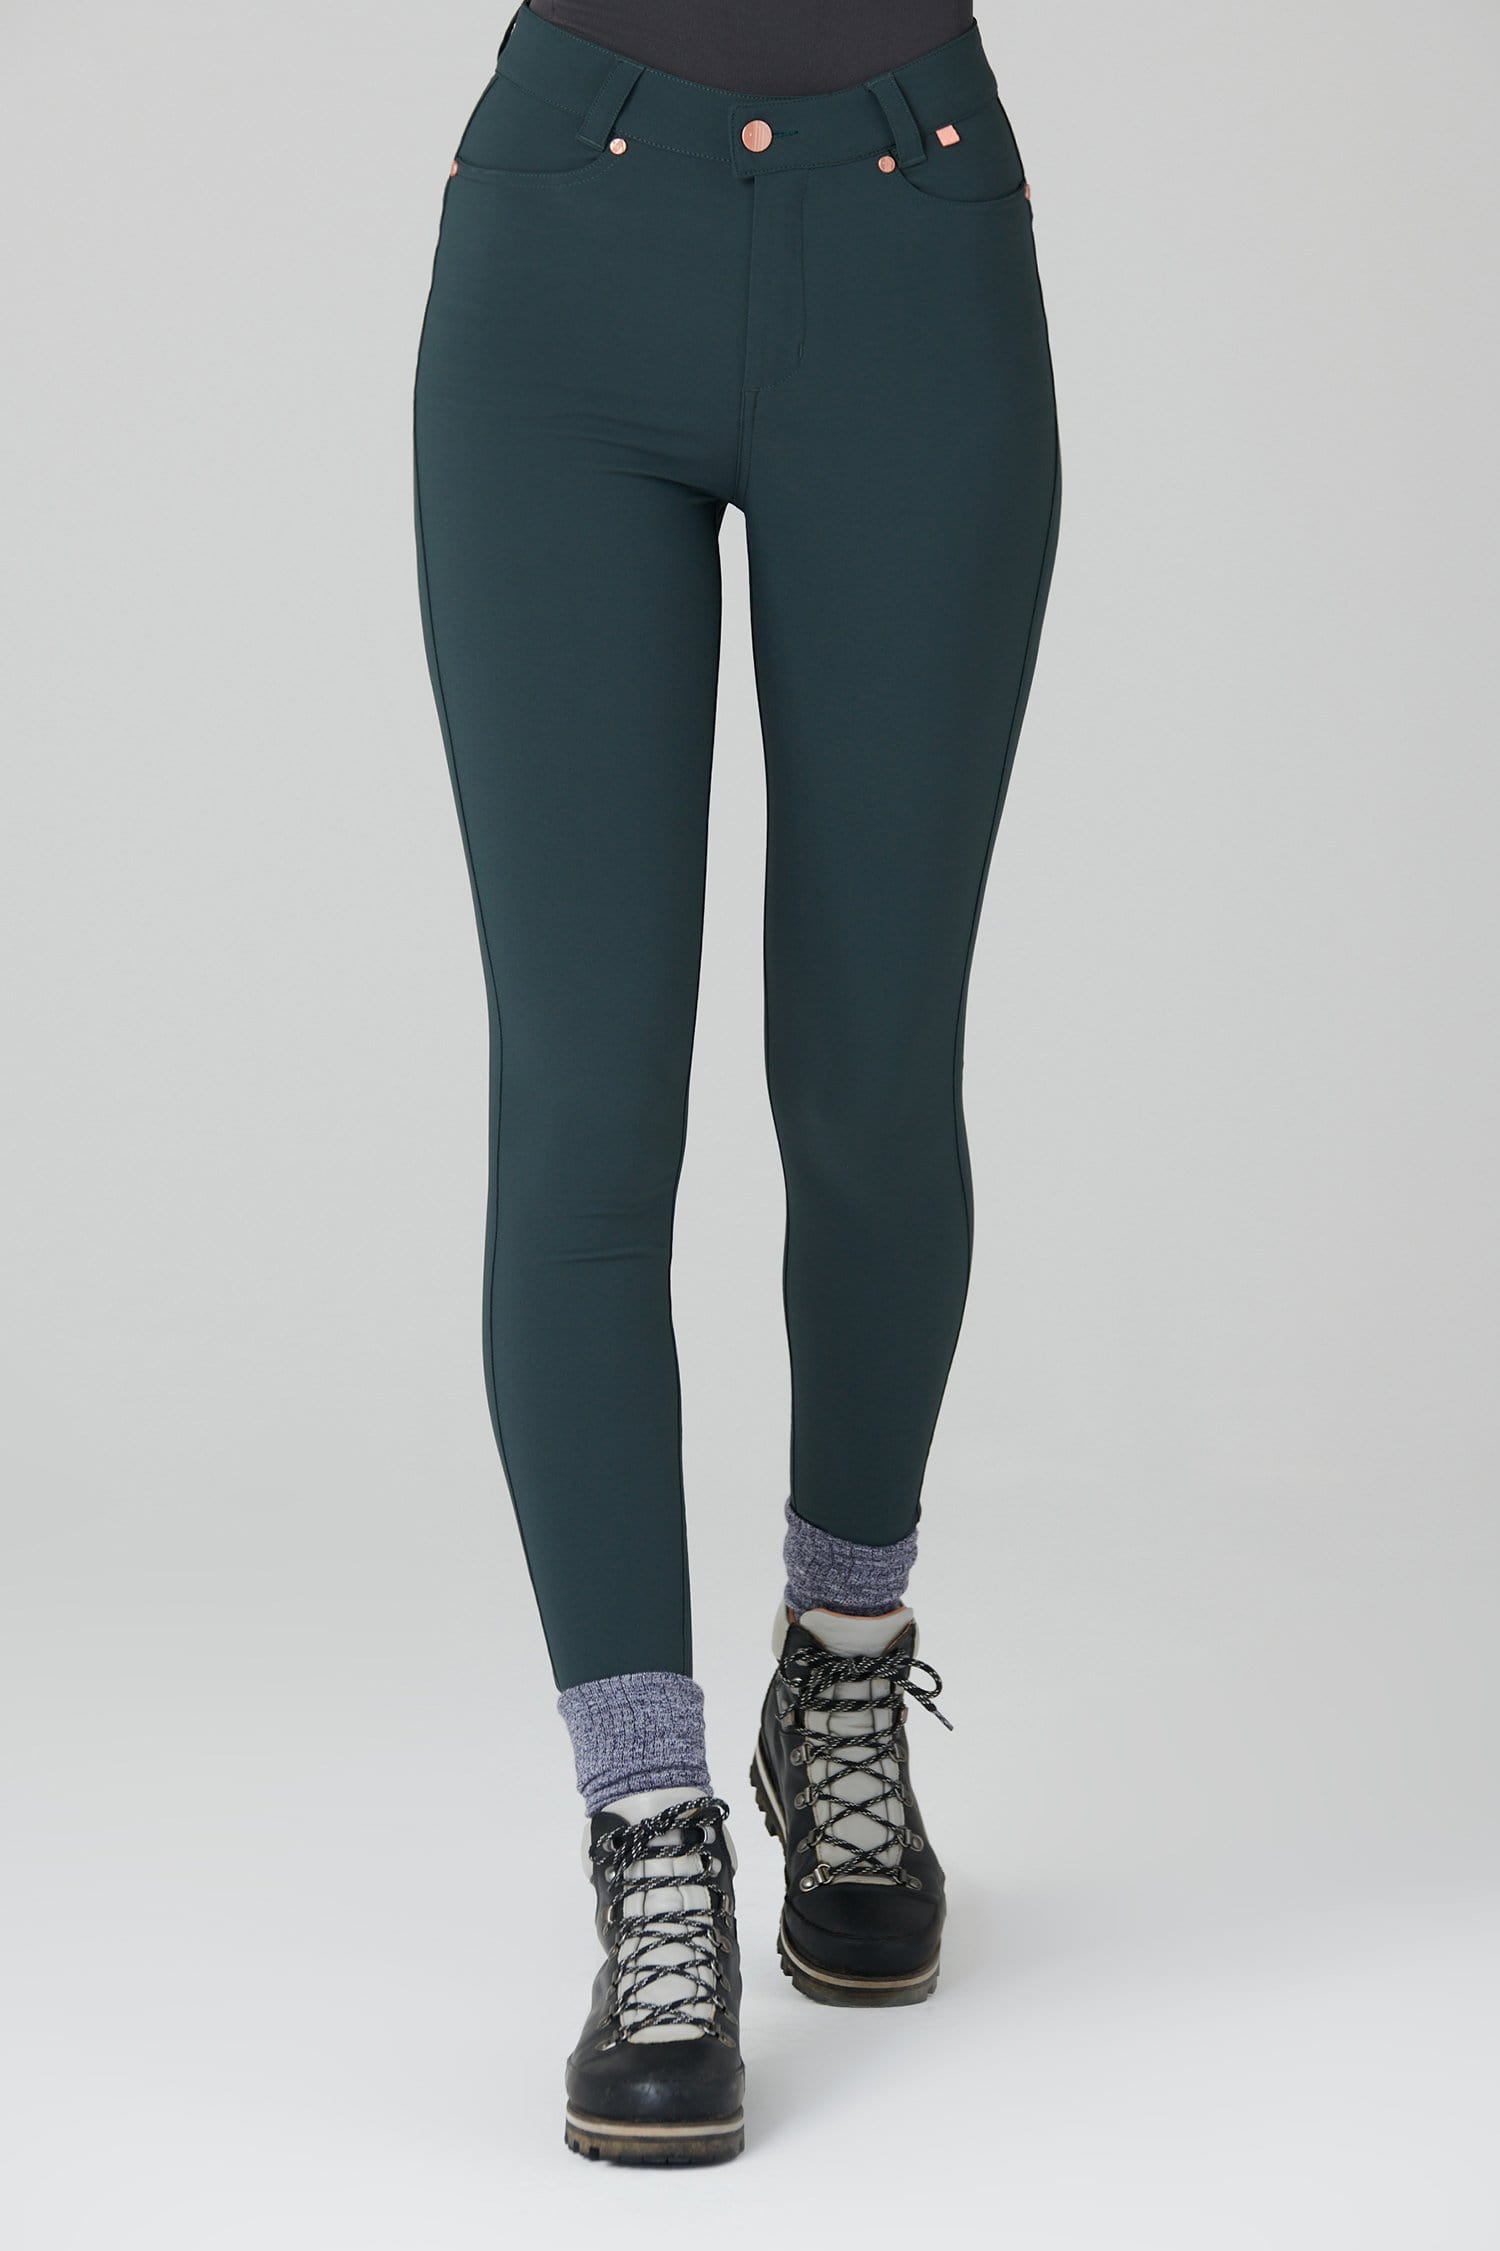 Thermal Skinny Outdoor Trousers - Forest Green - 26r / Uk8 - Womens - Acai Outdoorwear